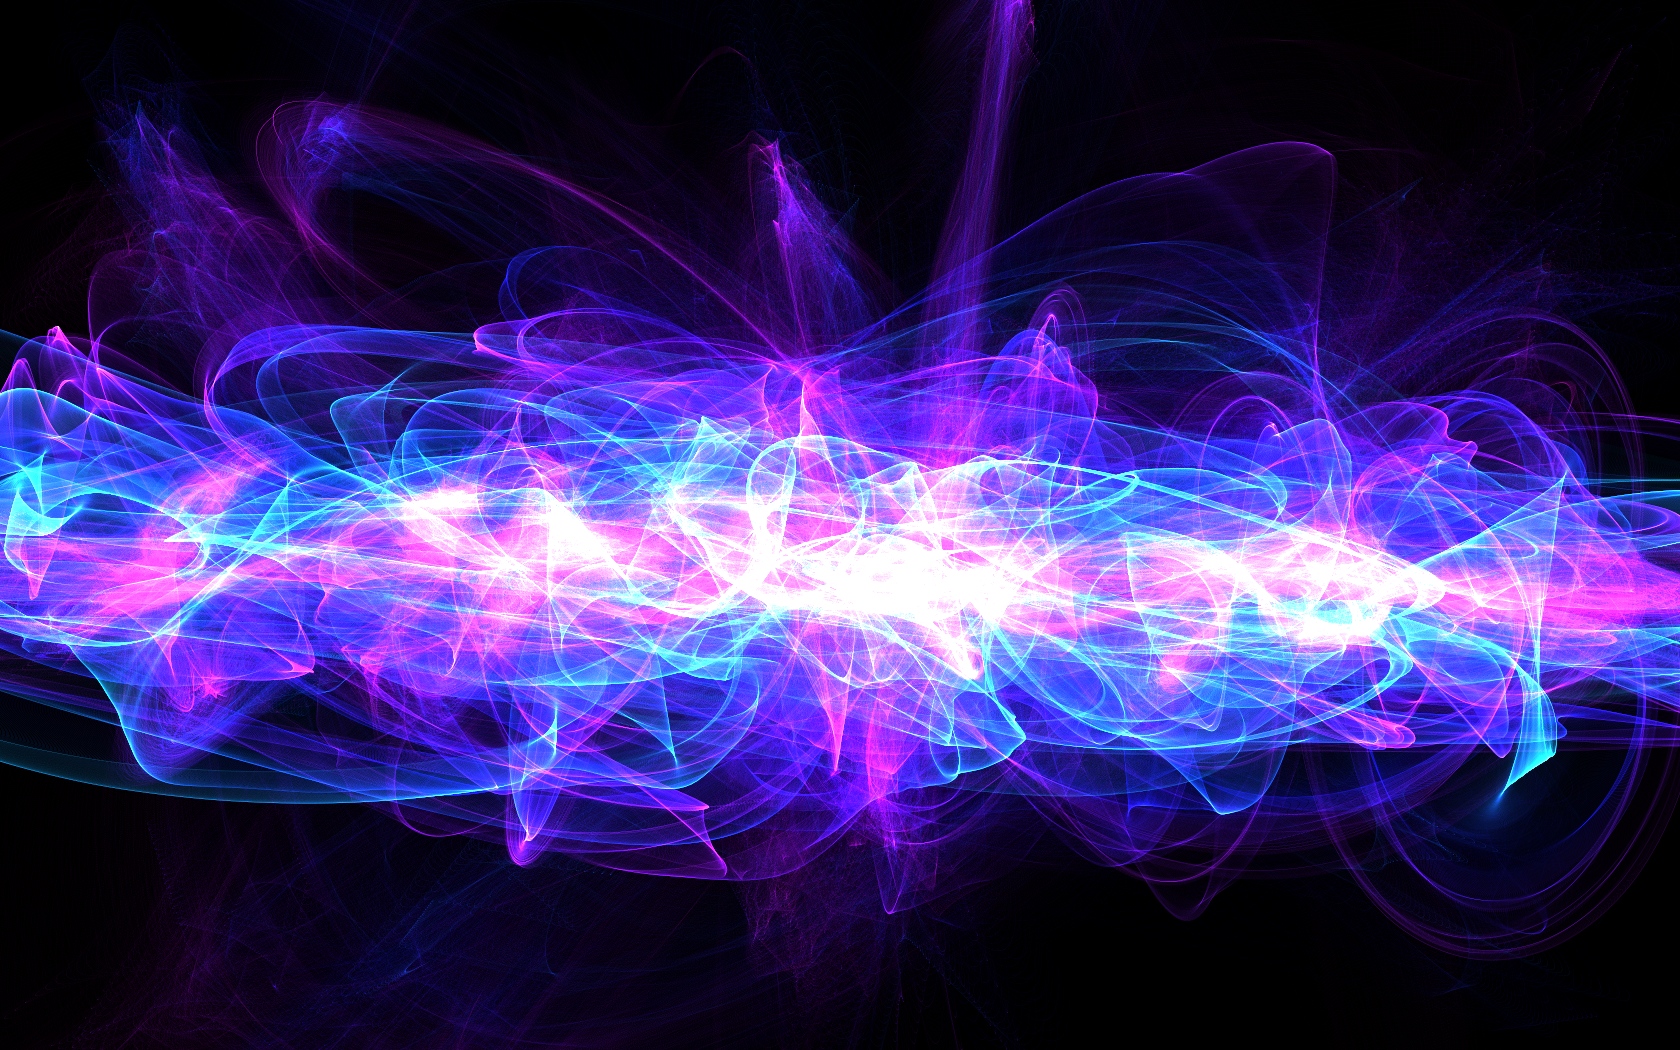 abstract, fractal, texture, light, cool, blue, cgi, colors, pattern, purple, shapes, wave